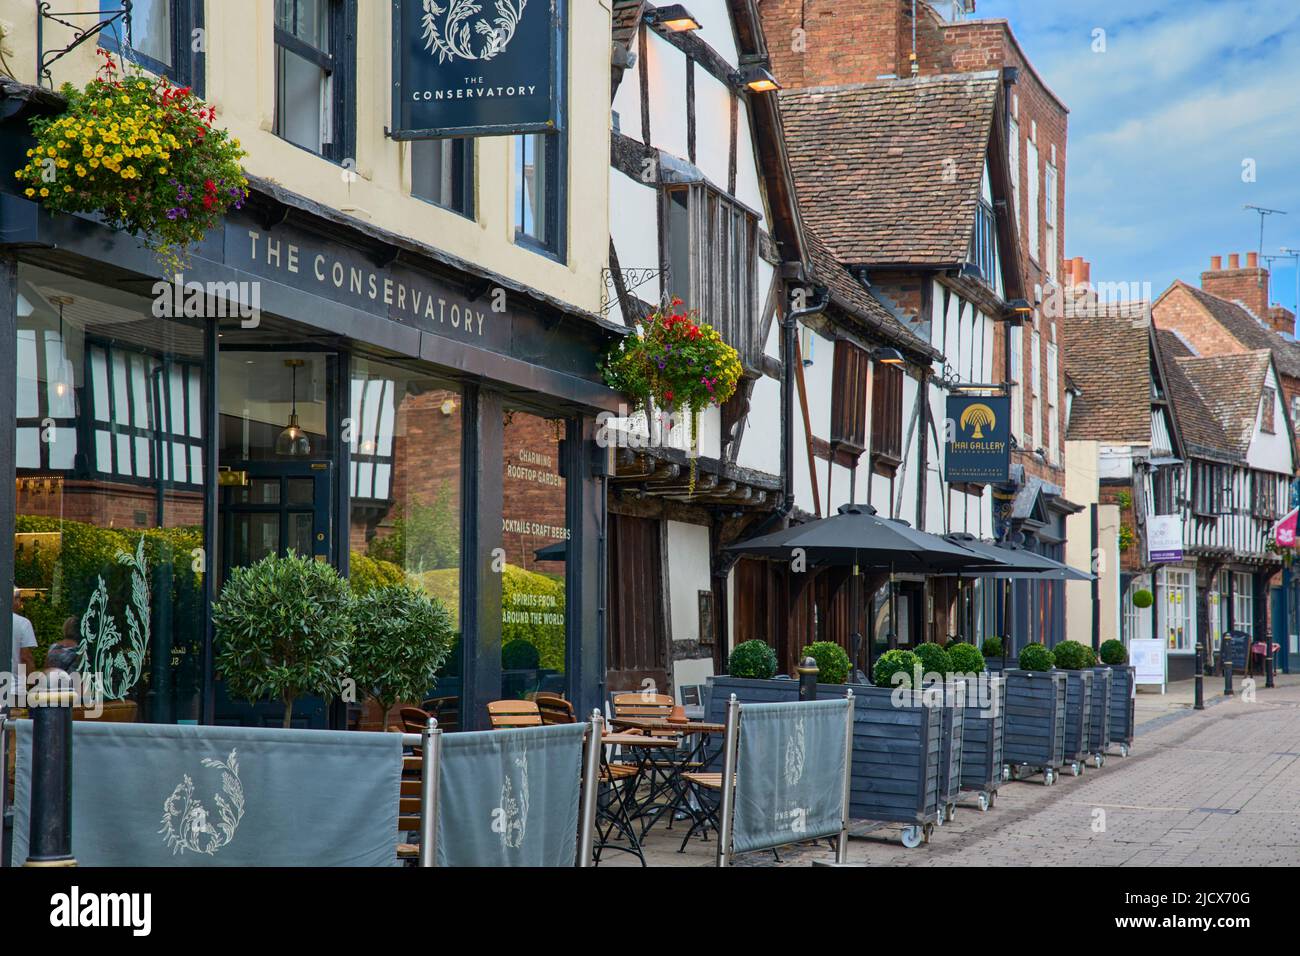 Half-timbered buildings in Friar Street, Worcester, Worcestershire, England, United Kingdom, Europe Stock Photo